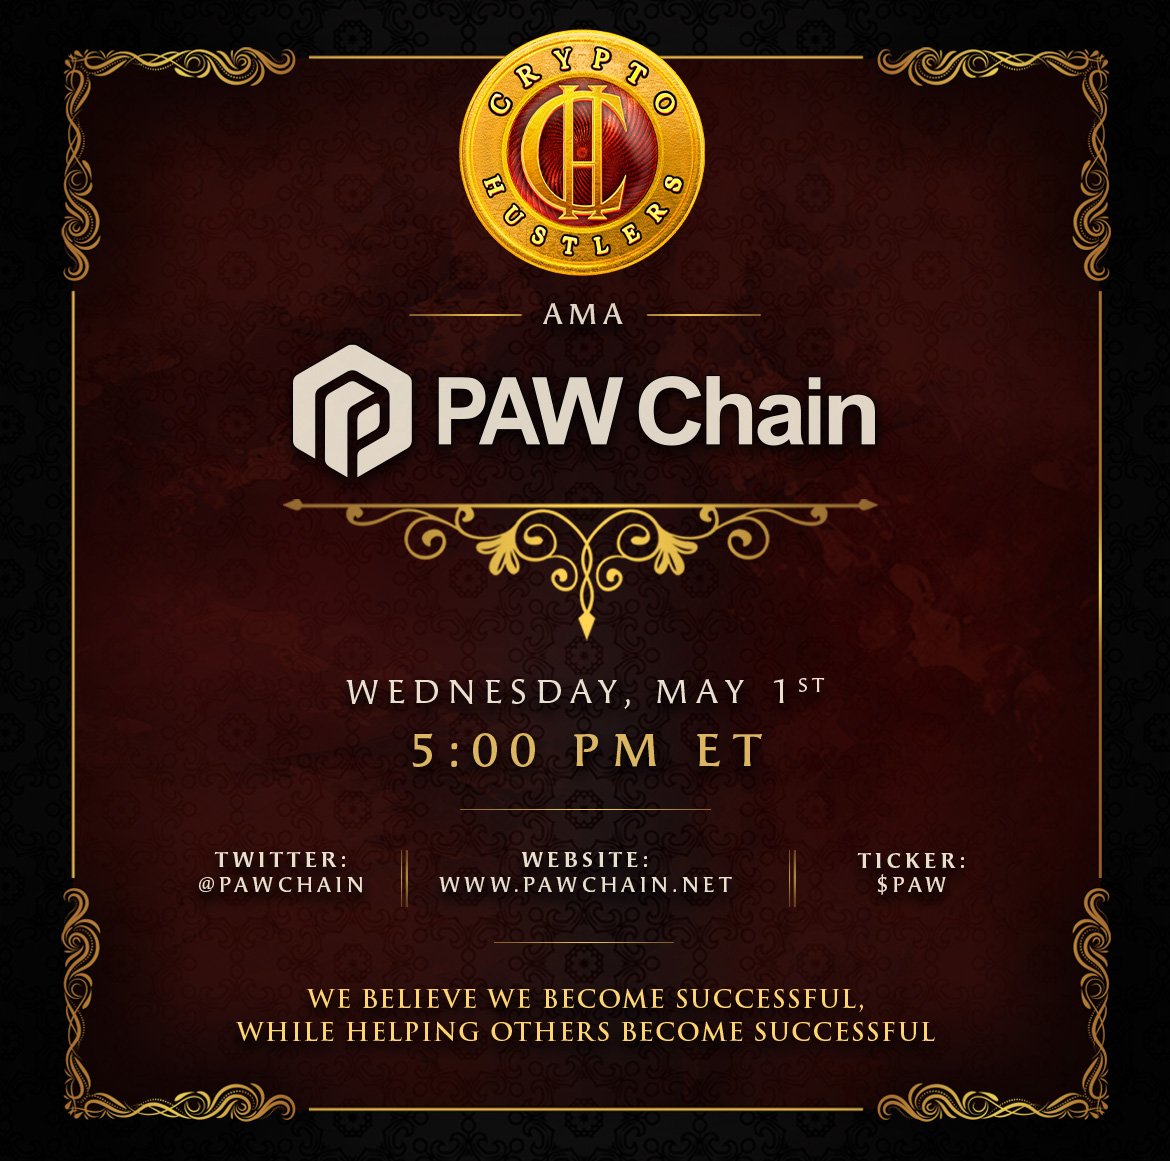 Set your reminders for May 1st so you don't miss our AMA space with @PawChain! Embrace a decentralized multi-chain realm, uniting industries globally as we bridge traditional and crypto worlds seamlessly. PawChain revolutionizes how industries interact with cryptocurrencies and…